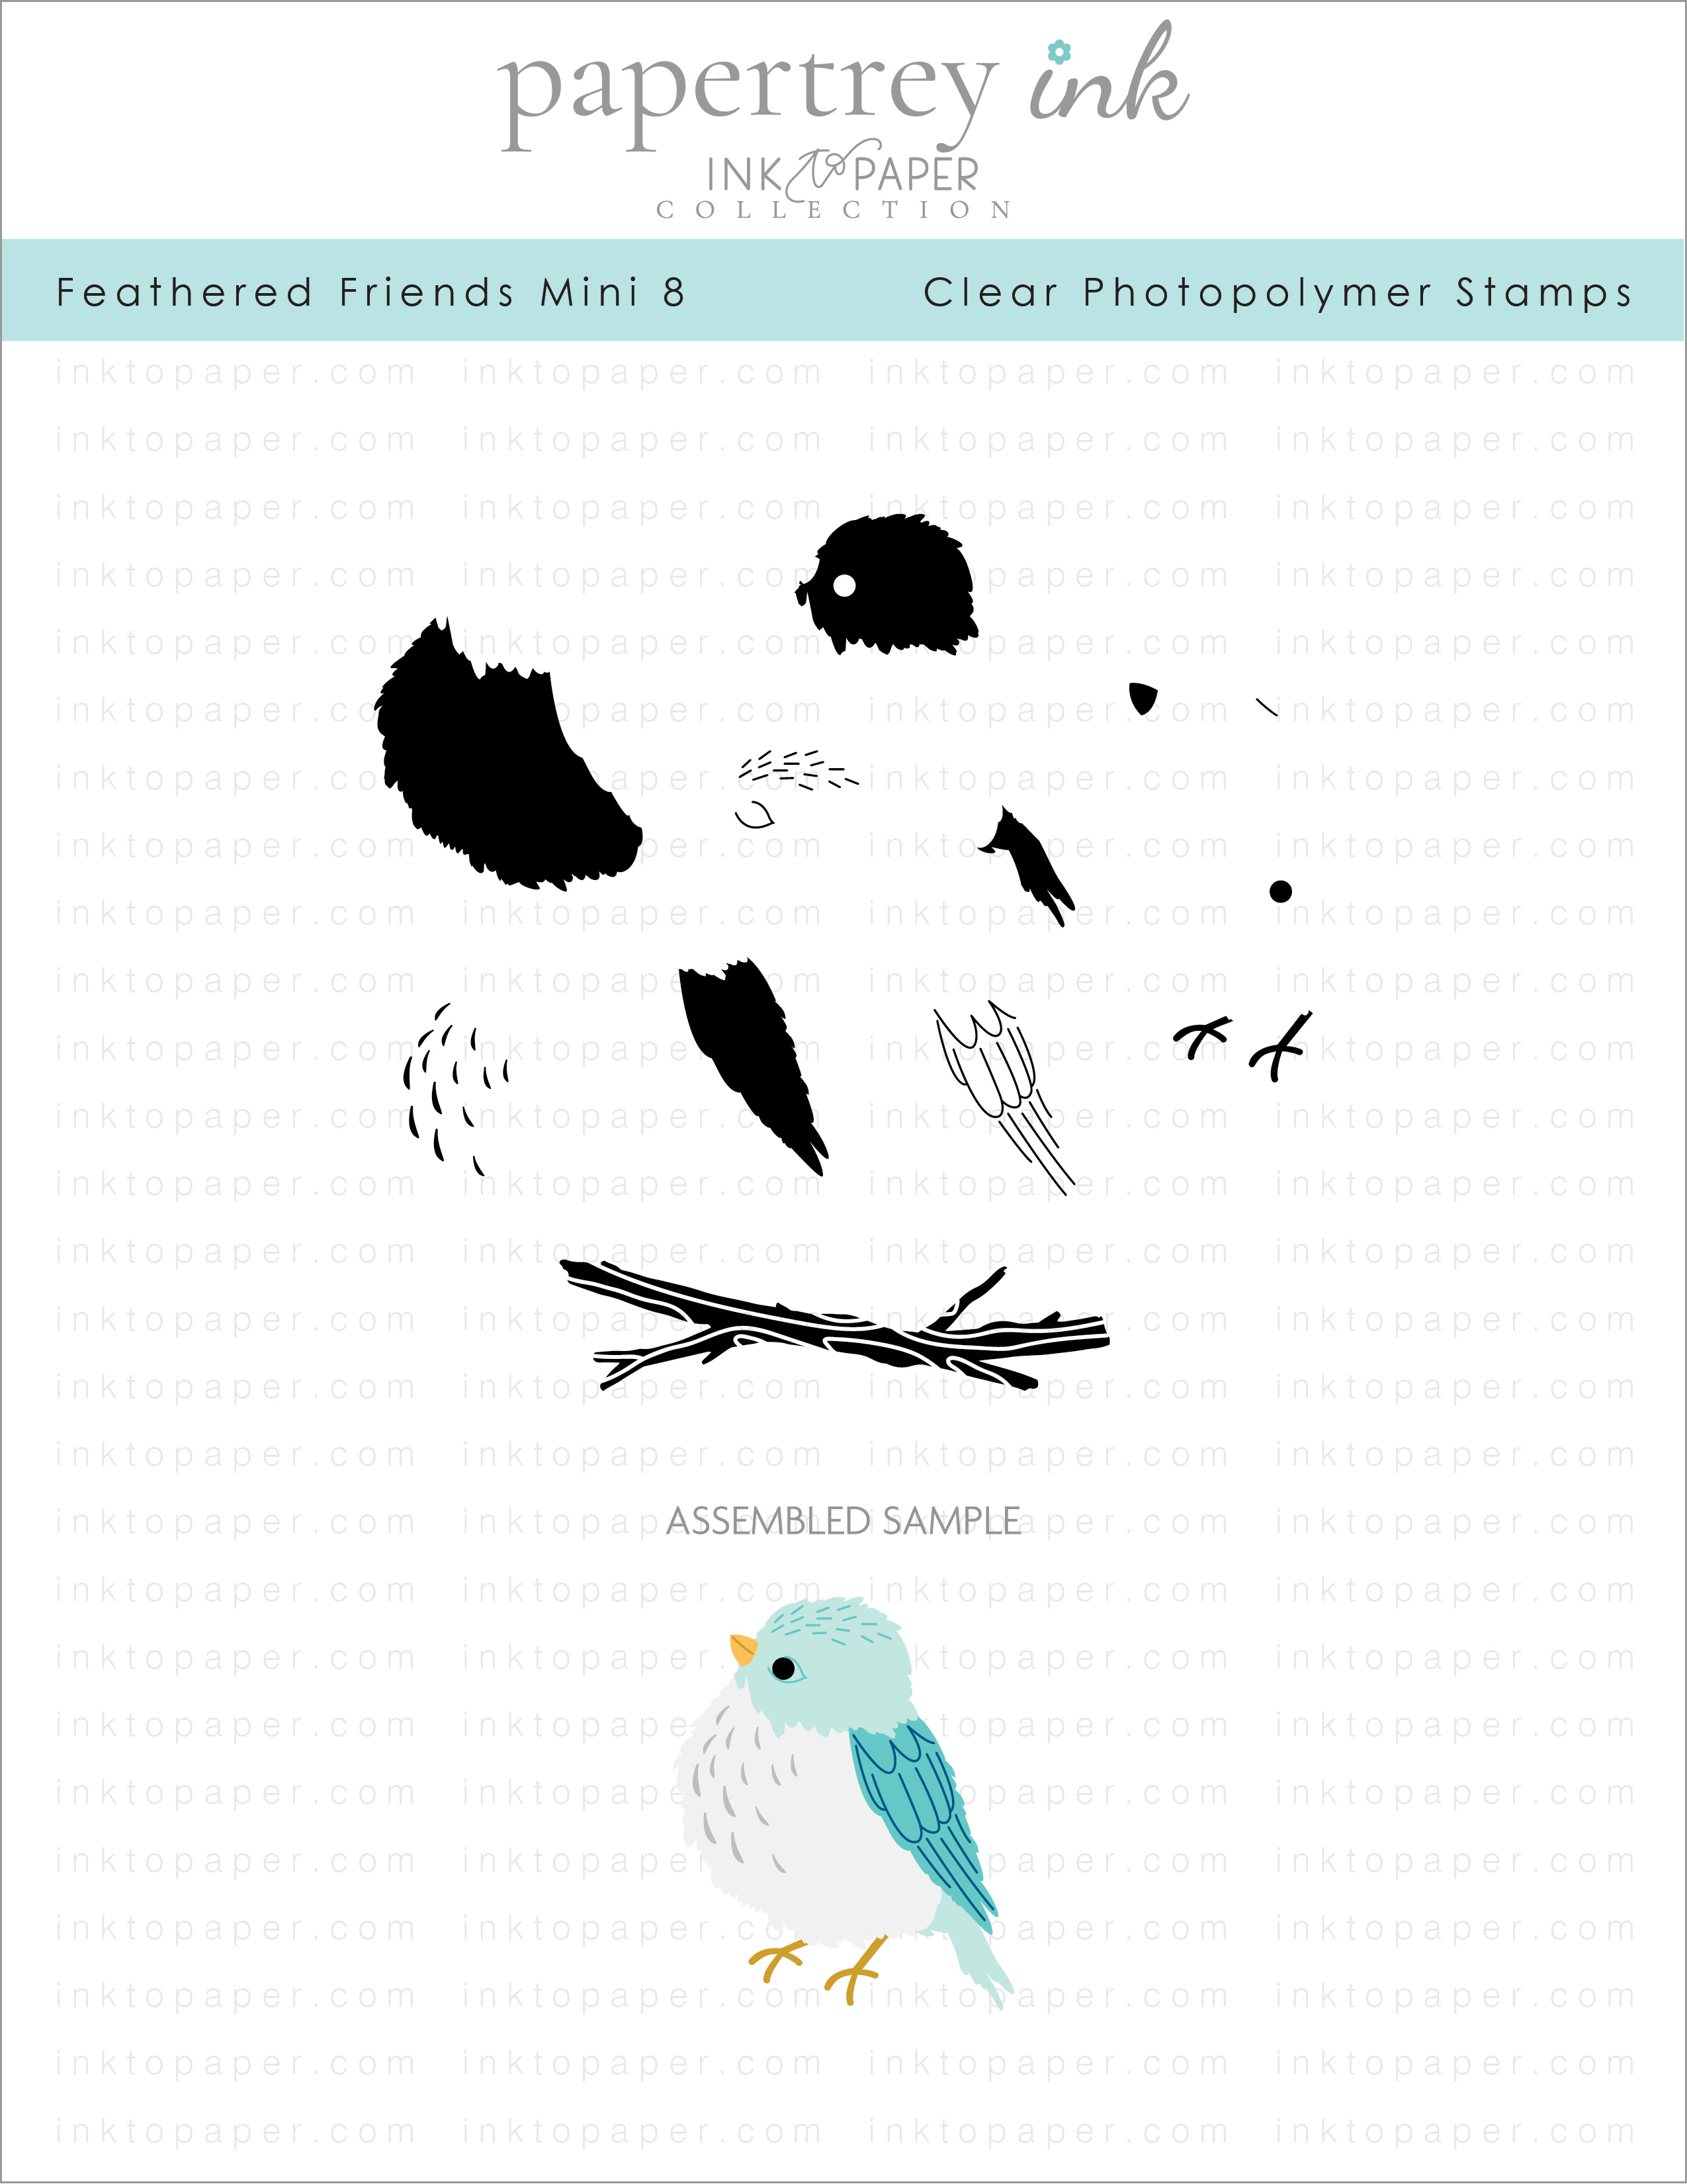 Feathered Friends Mini 8 Mini Stamp Set: Papertrey Ink